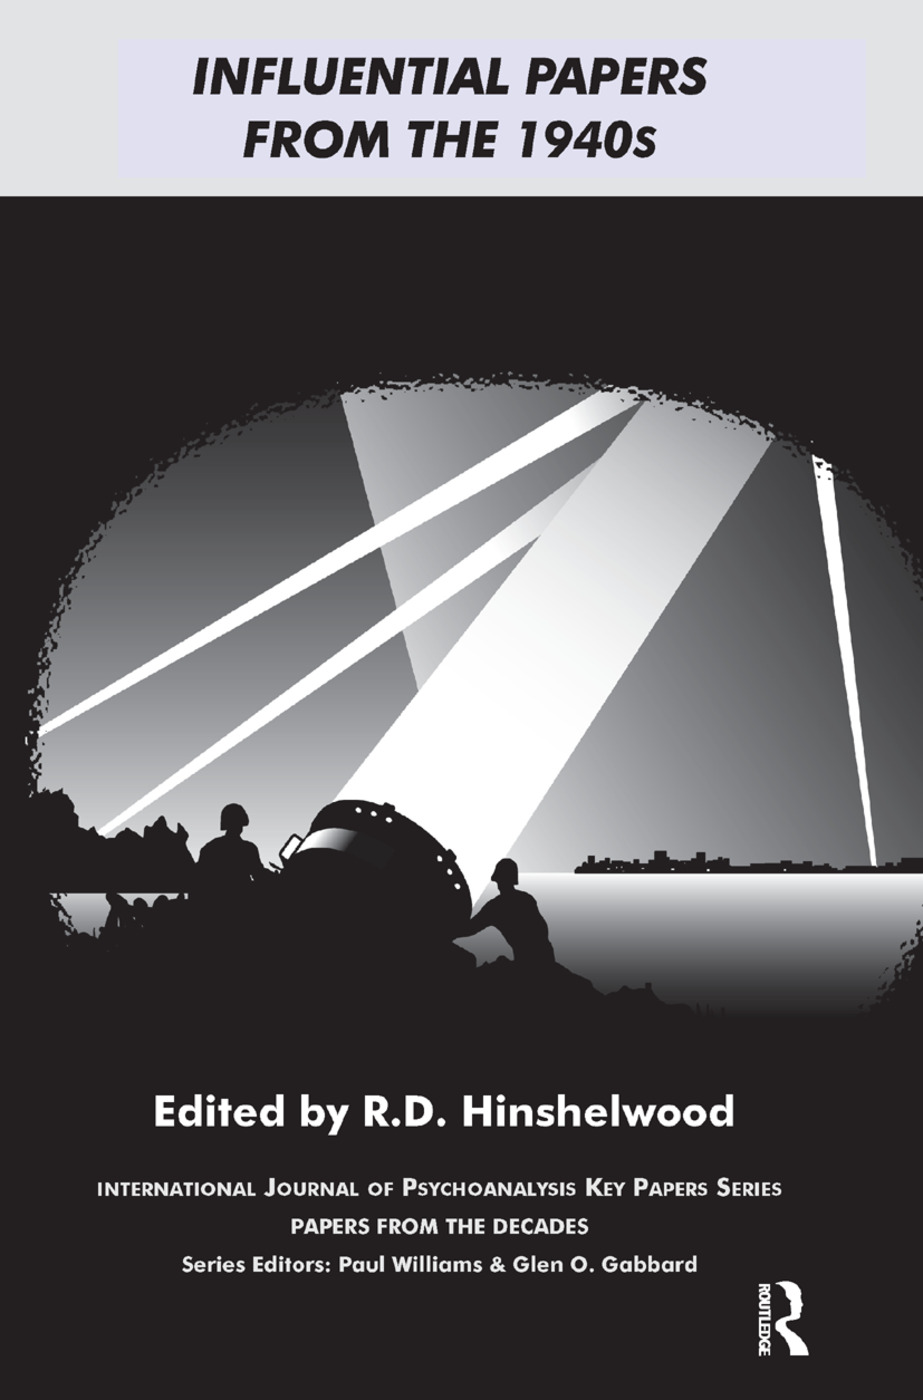 Hinshelwood, R: Influential Papers from the 1940s - R.D. Hinshelwood